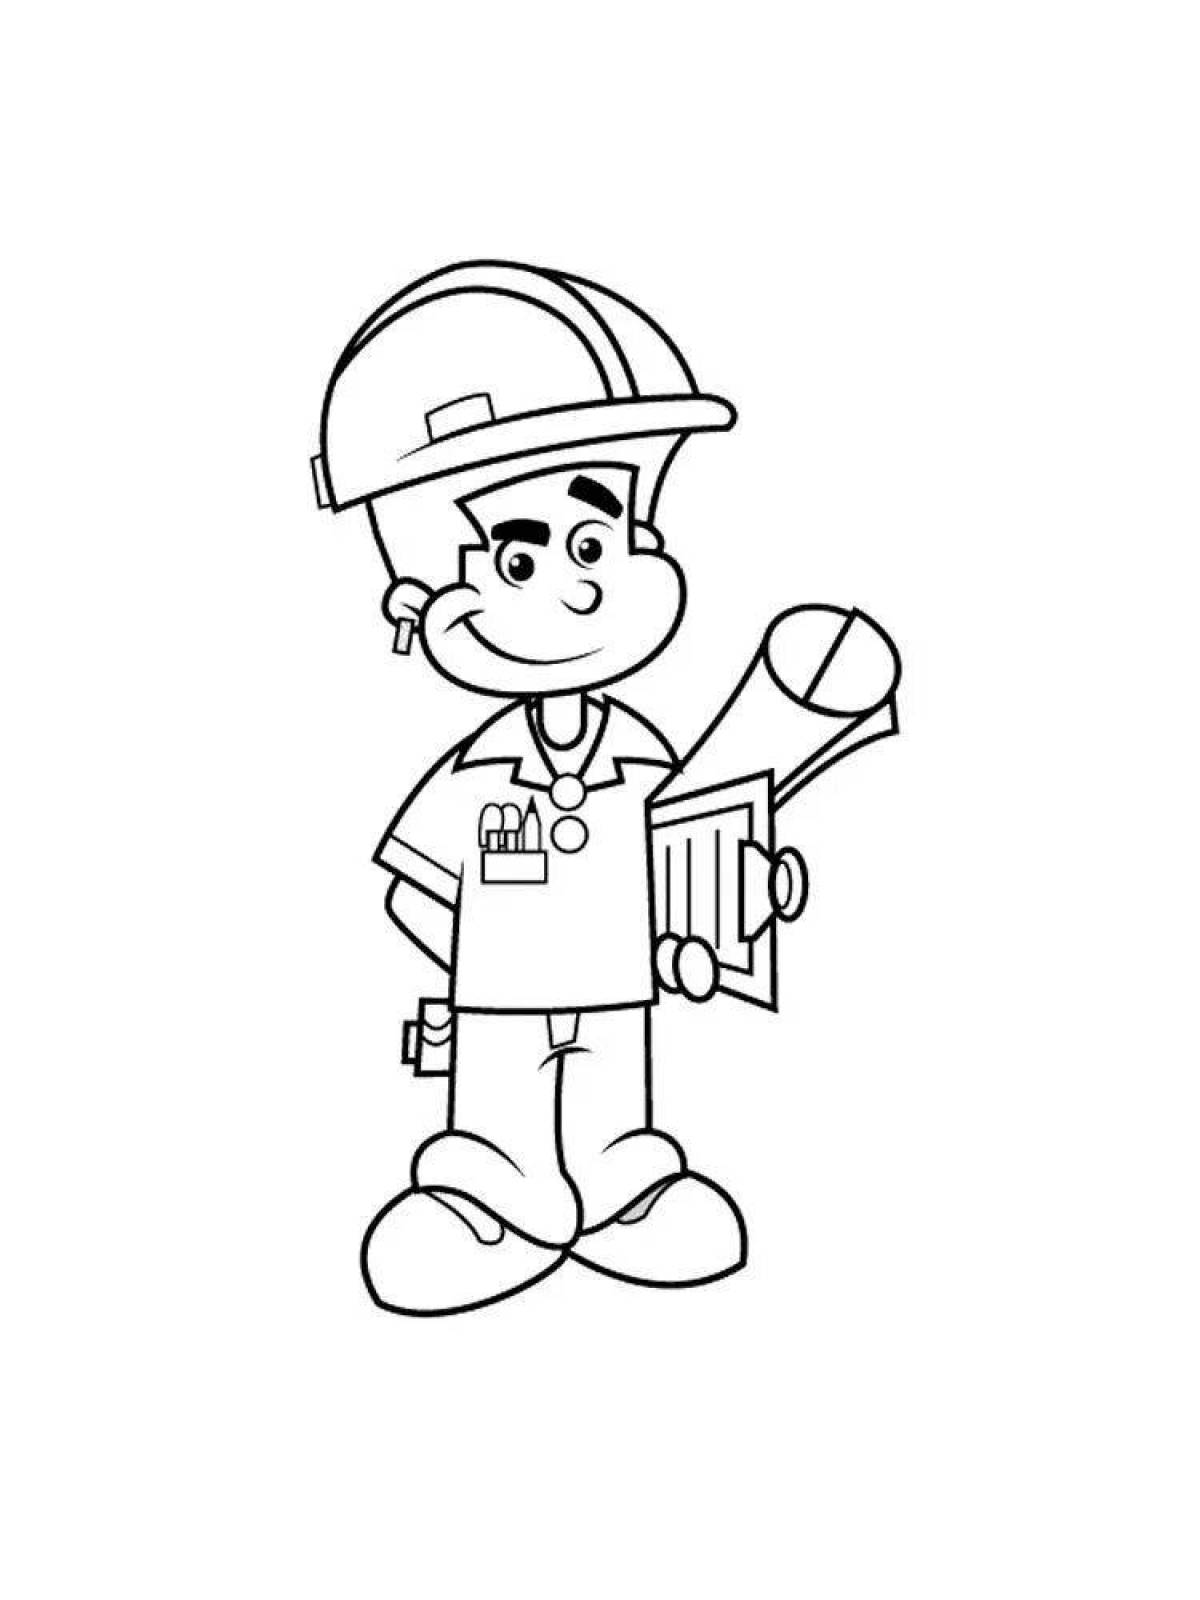 Engineer's exciting coloring book